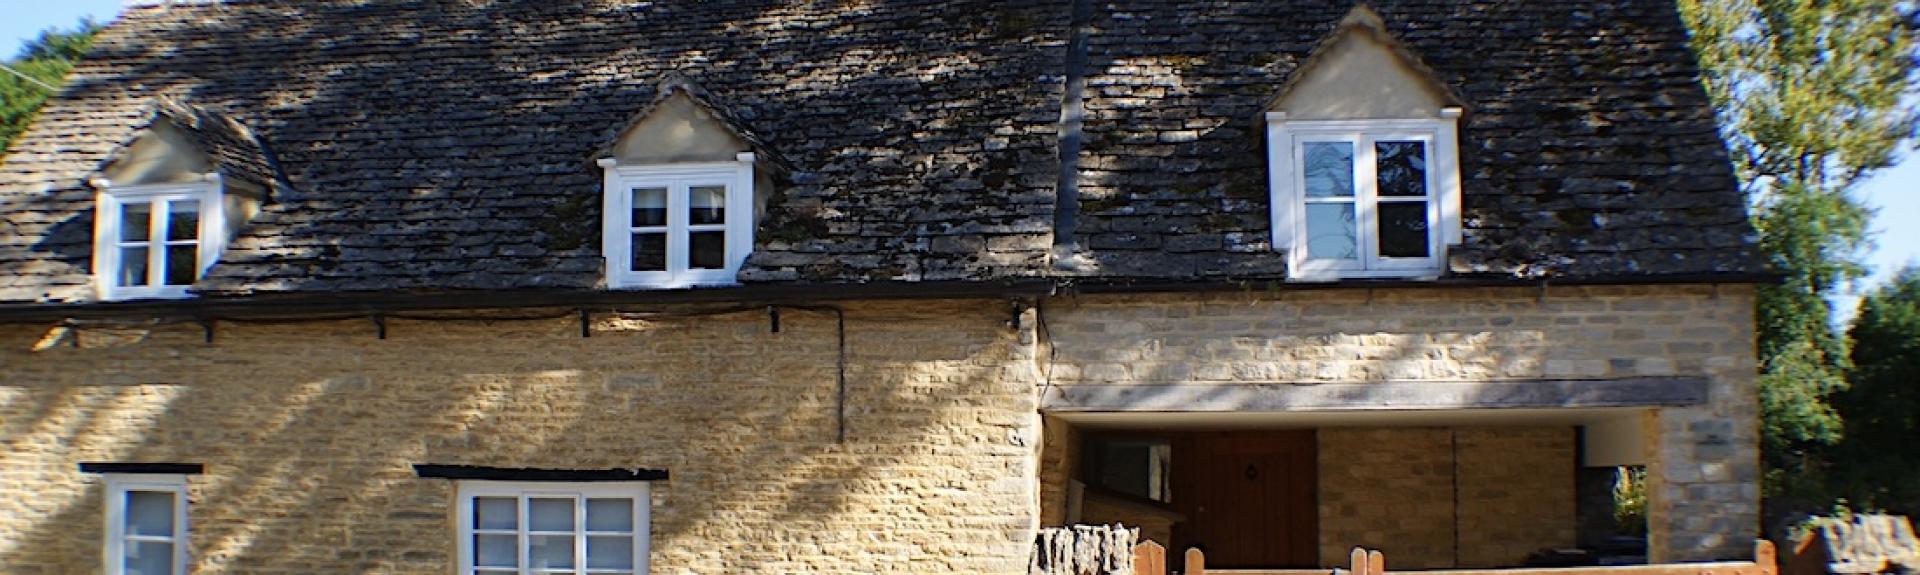 Exterior of a Cotswold stone cottage behind a gated front garden.